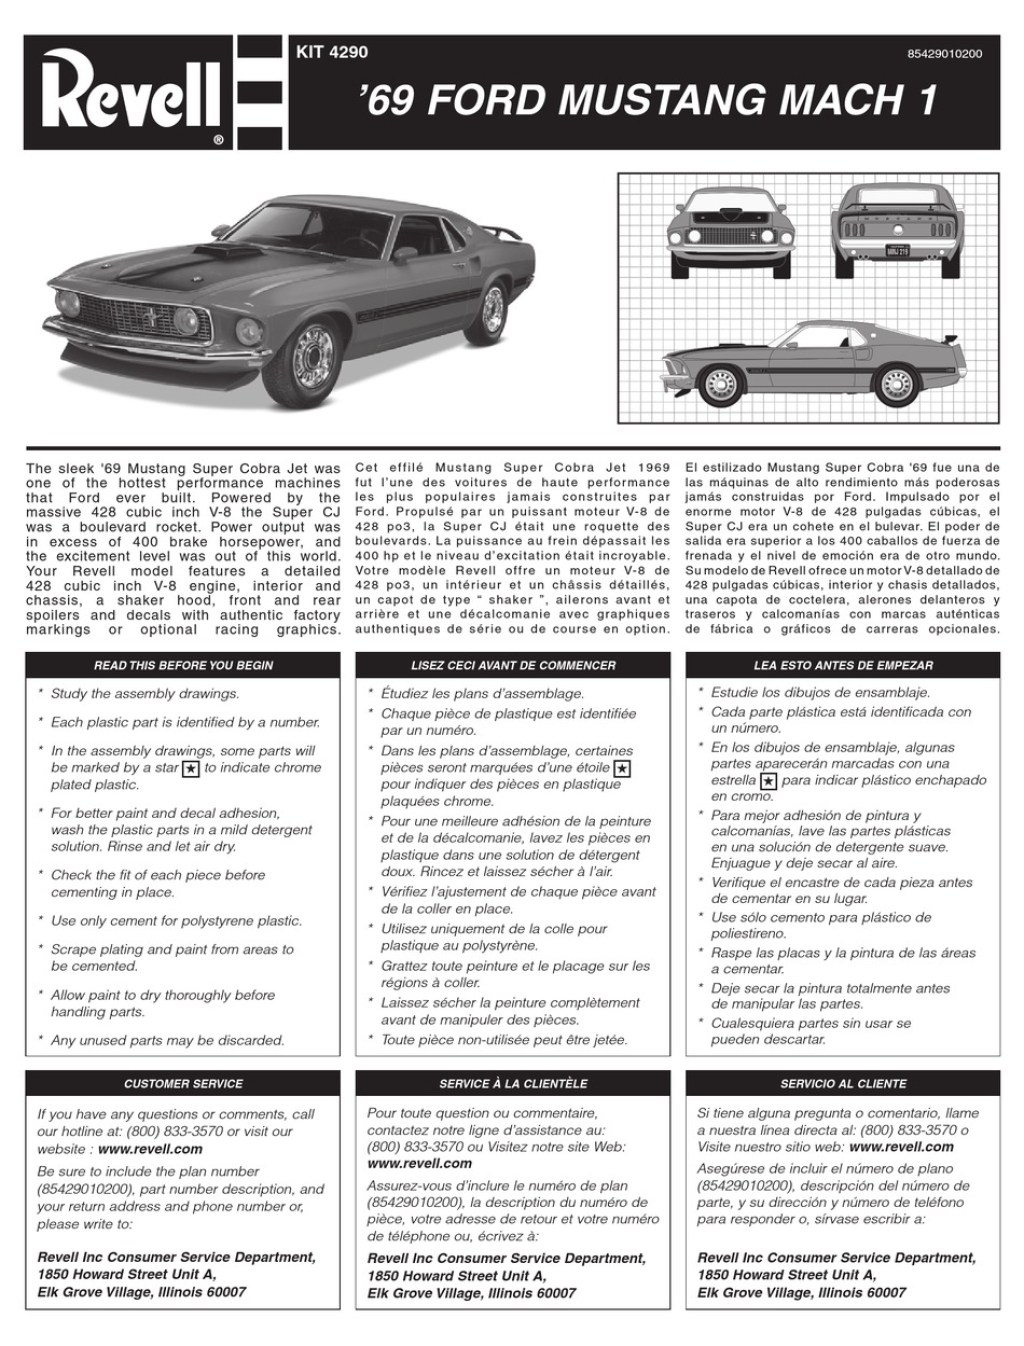 Picture of: REVELL  FORD MUSTANG MACH  PARTS MANUAL Pdf Download  ManualsLib